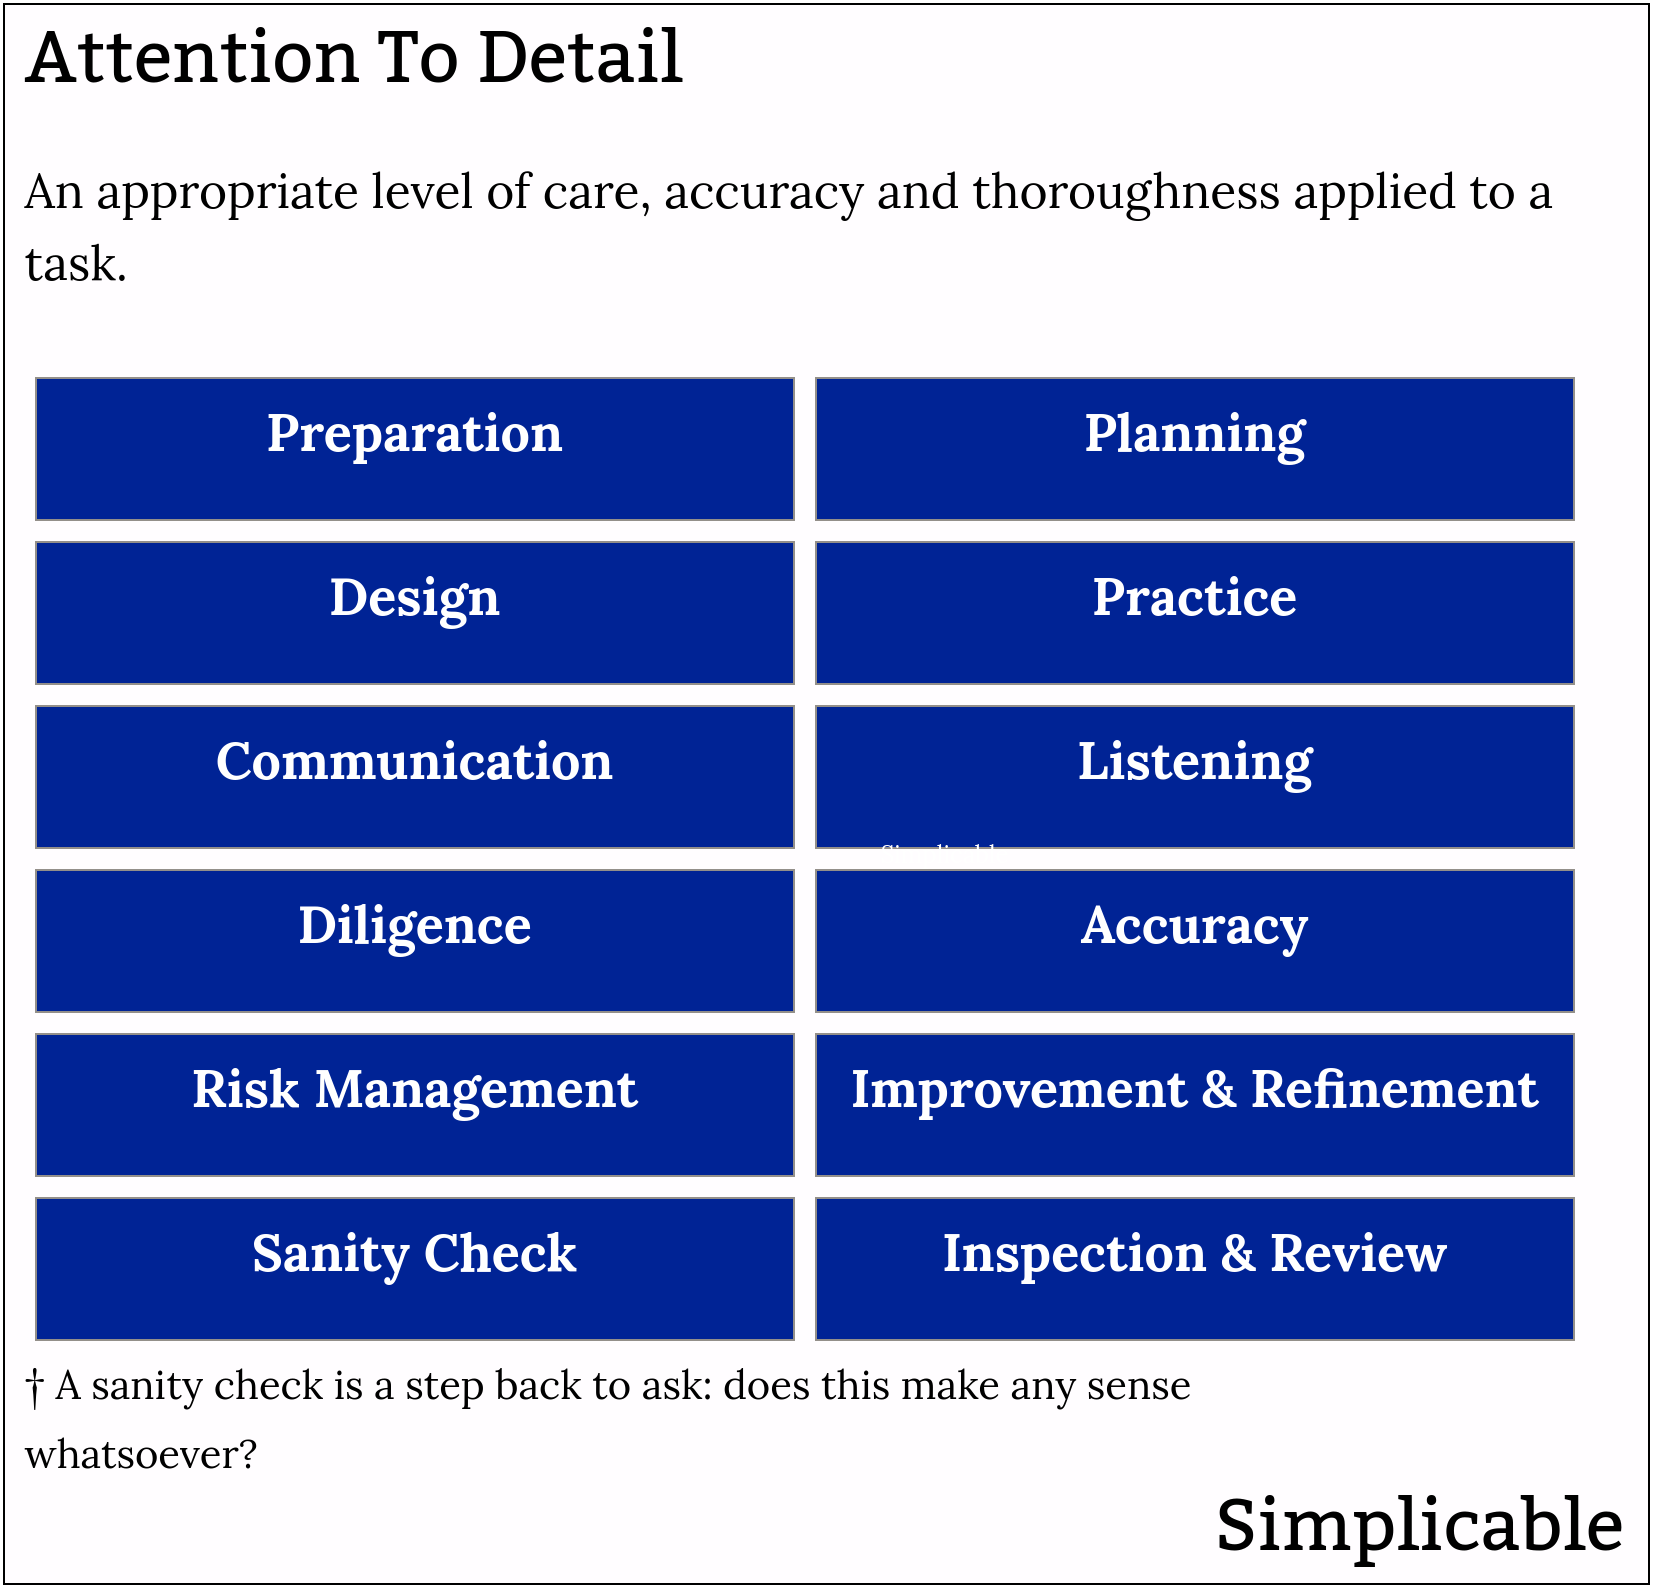 types of attention to detail